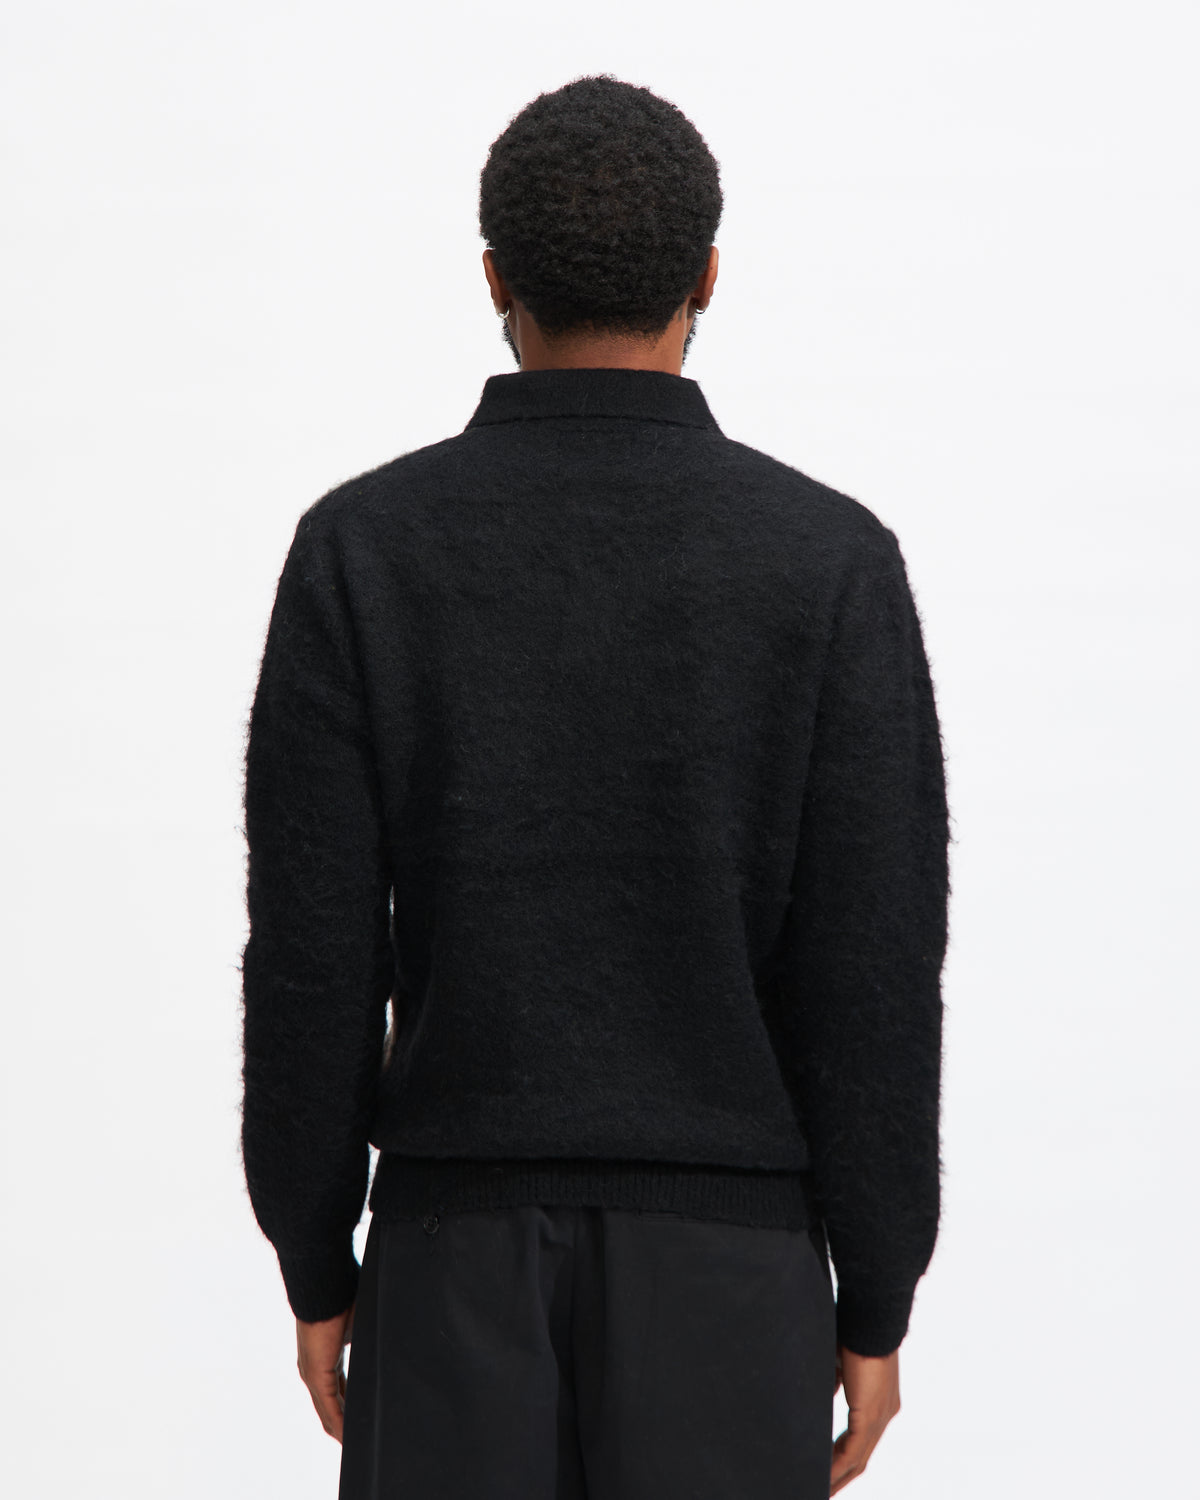 Knit Polo Shaggy in Black